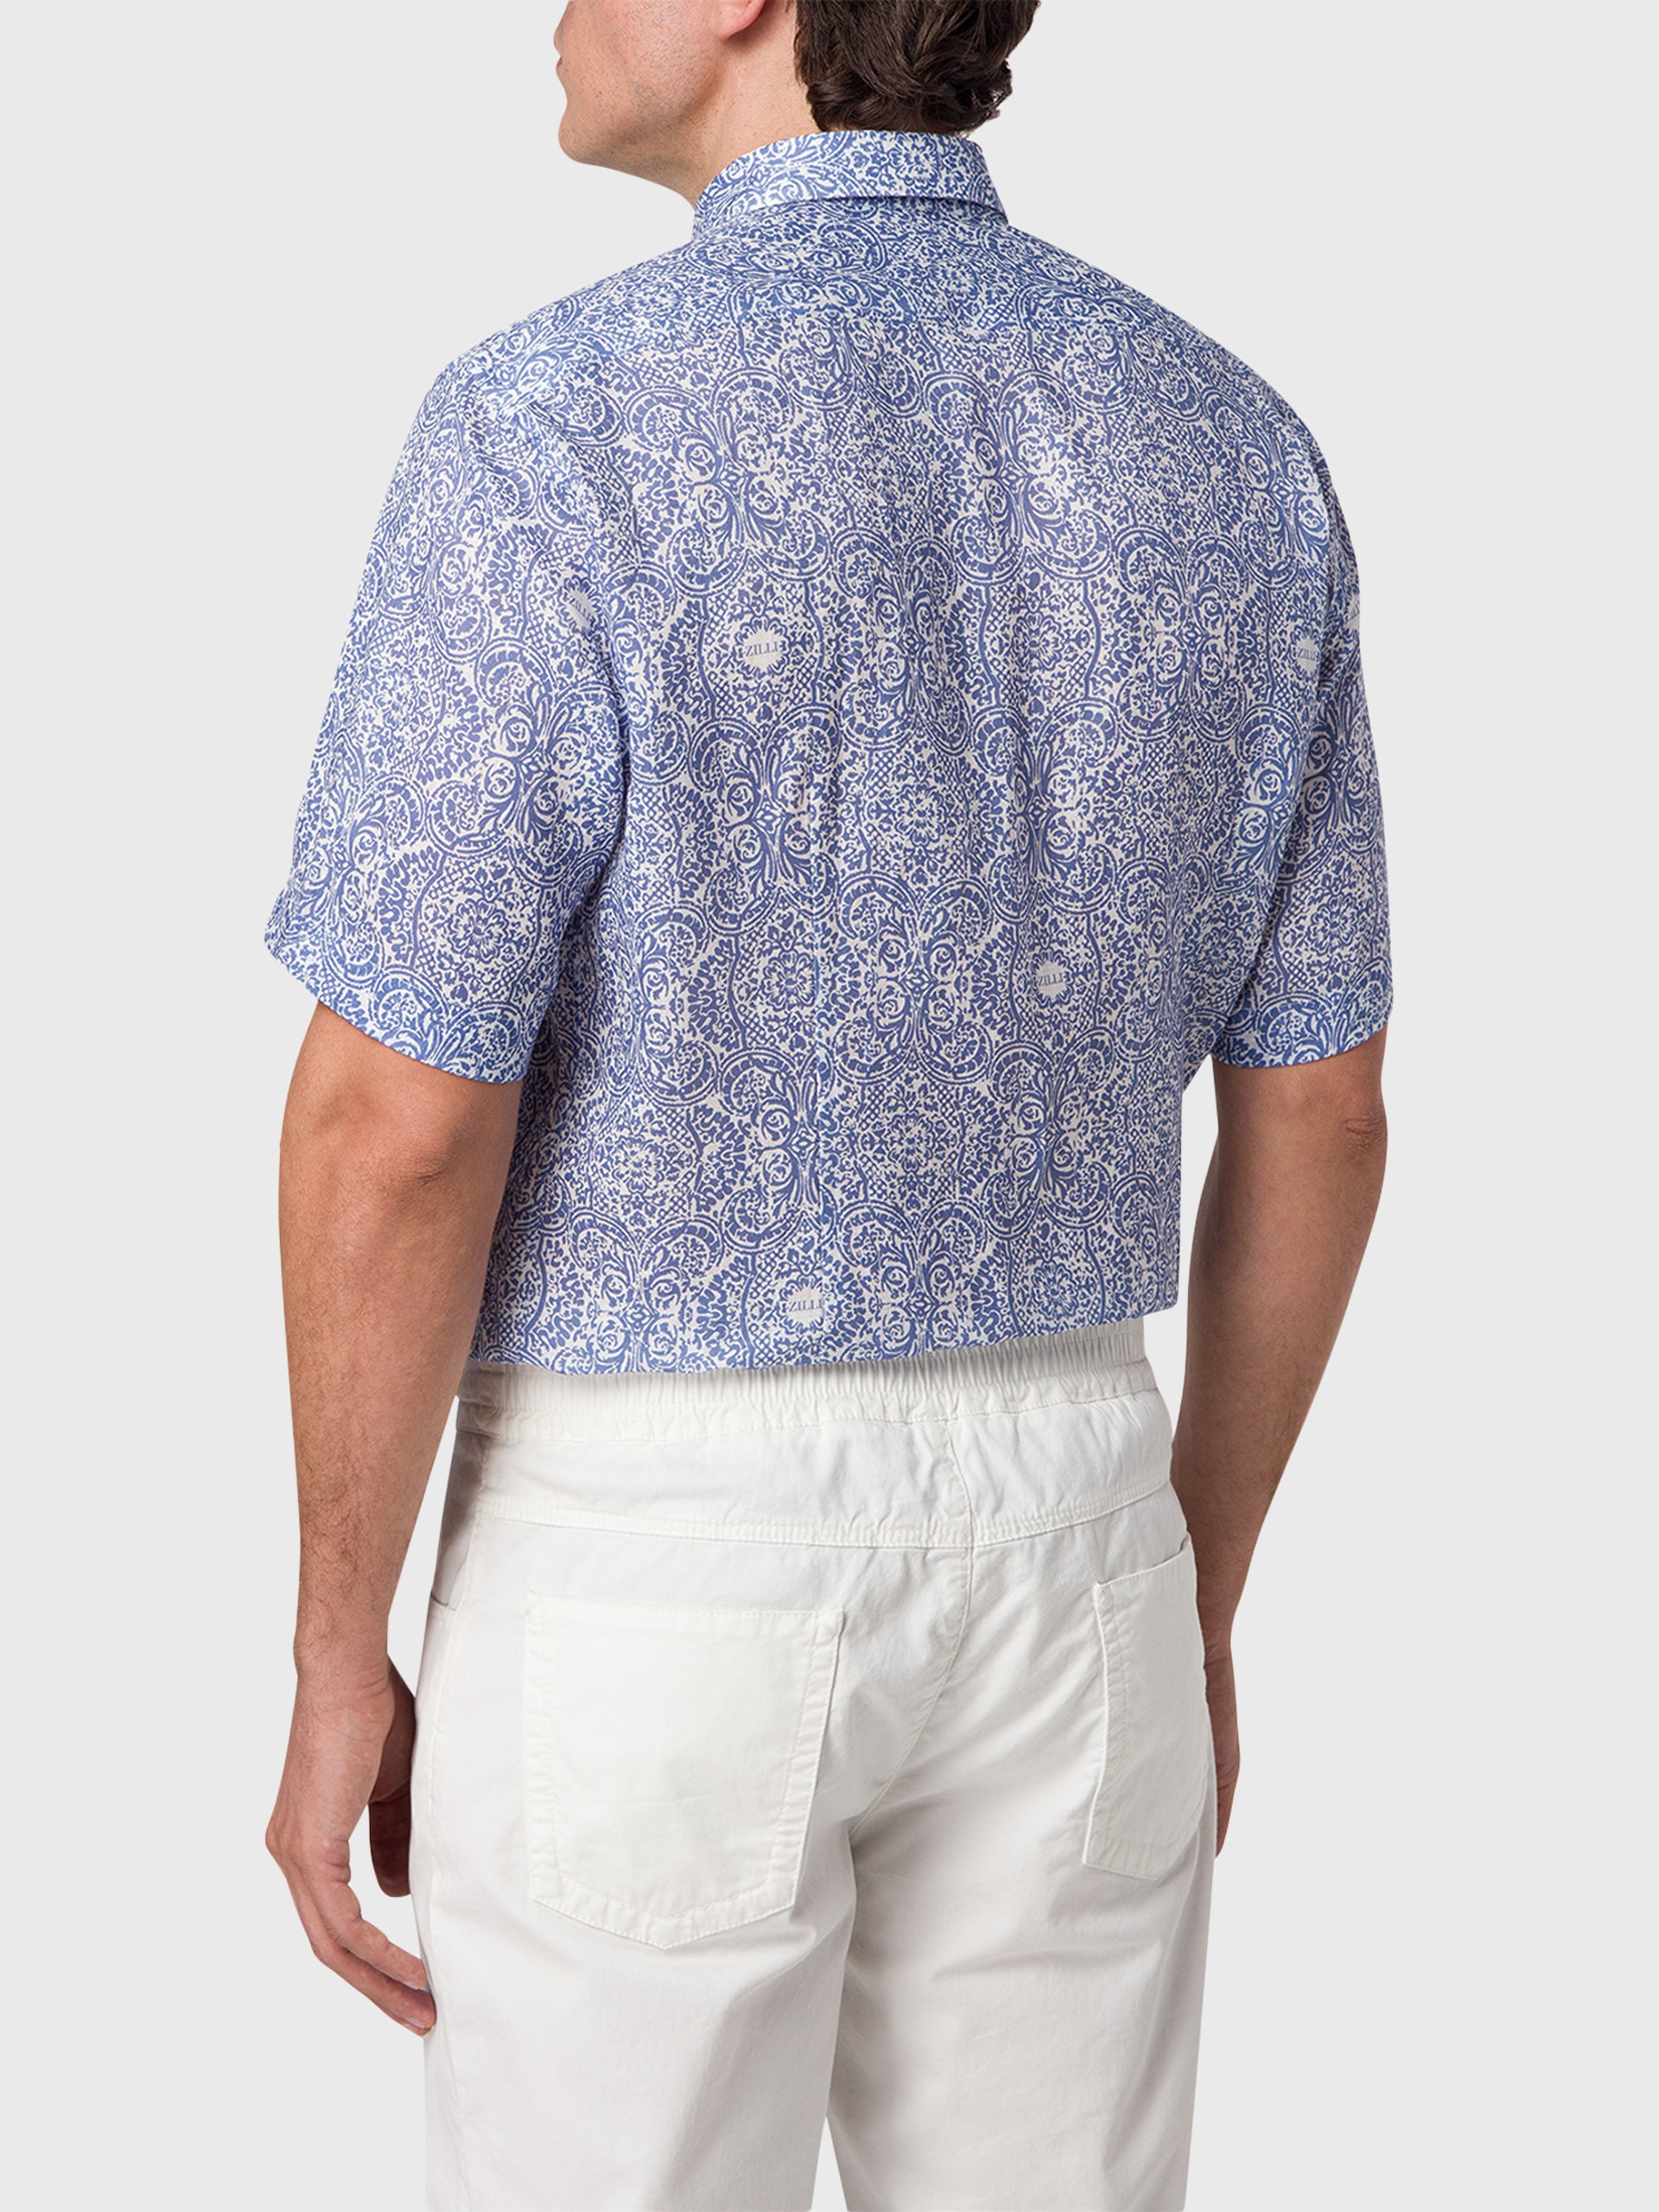 Short Sleeve Shirt with Paisley Printed Pattern